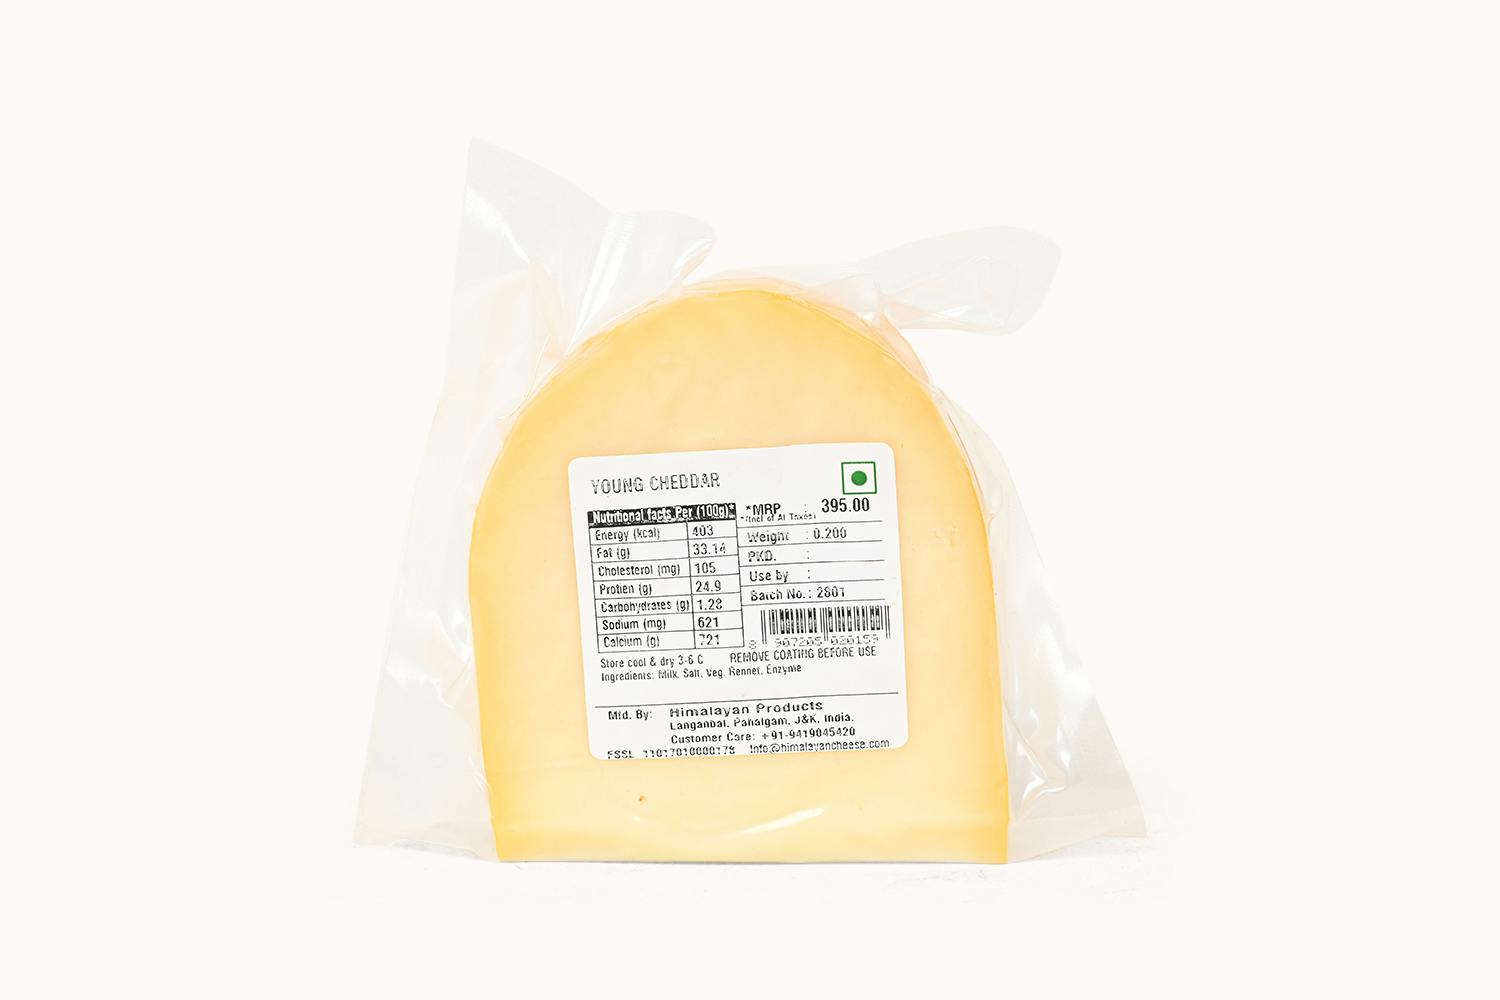 /h/i/himalayan-products-young-cheddar-200g-2_jim01ncl1apfvlul.jpg